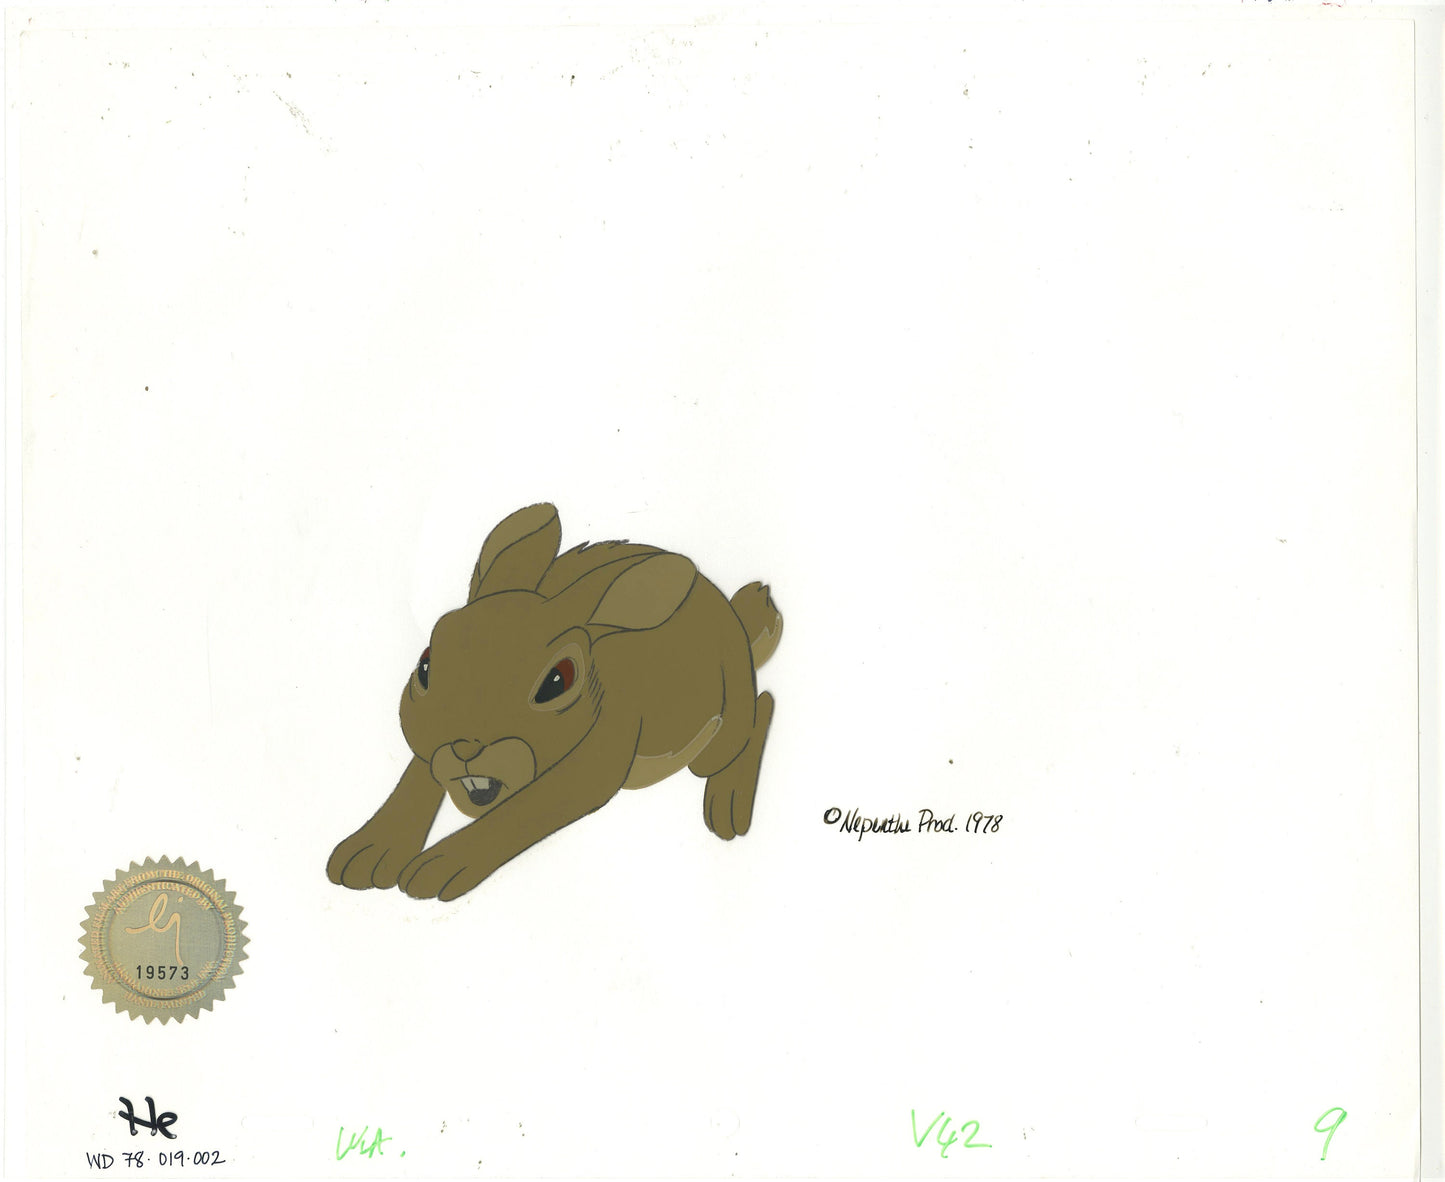 Watership Down 1978 Production Animation Cel of Pipkin with LJE Seal and COA 019-002